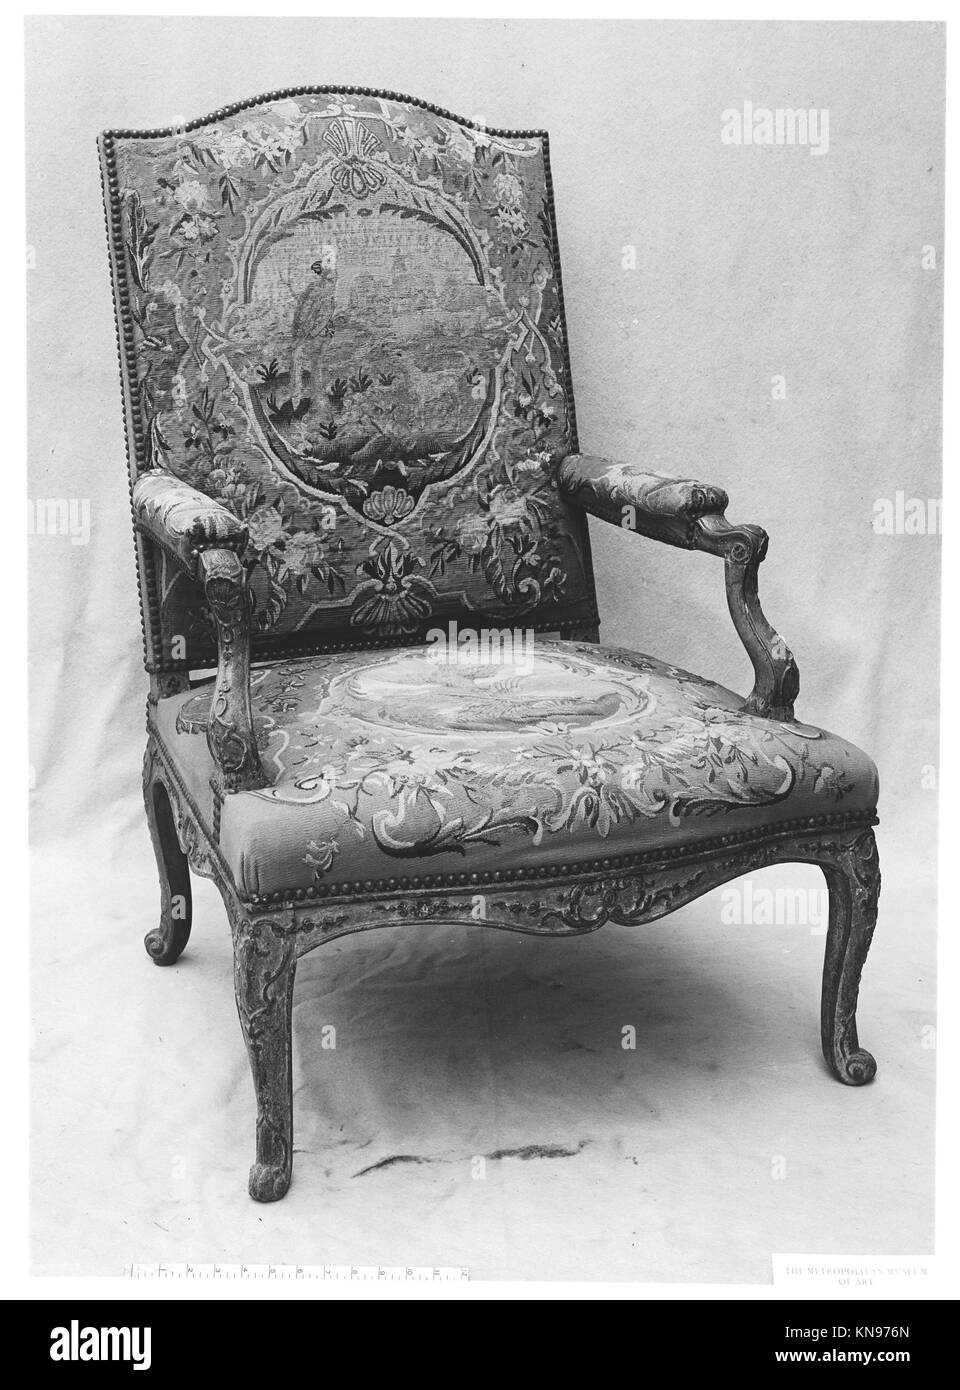 Armchair (fauteuil) MET 4338 Armchair (fauteuil) MET 4338 /189346 Factory: Tapestry woven at Aubusson, Manufacture Royale, est. 1665: Manufacture, ca. 1812?present day, Armchair (fauteuil), first quarter 18th century, Carved walnut, Aubusson tapestry cover, 43 ? 29 1/4 ? 27 in. (109.2 ? 74.3 ? 68.6 cm). The Metropolitan Museum of Art, New York. Gift of J. Pierpont Morgan, 1906 (07.225.61) Stock Photo